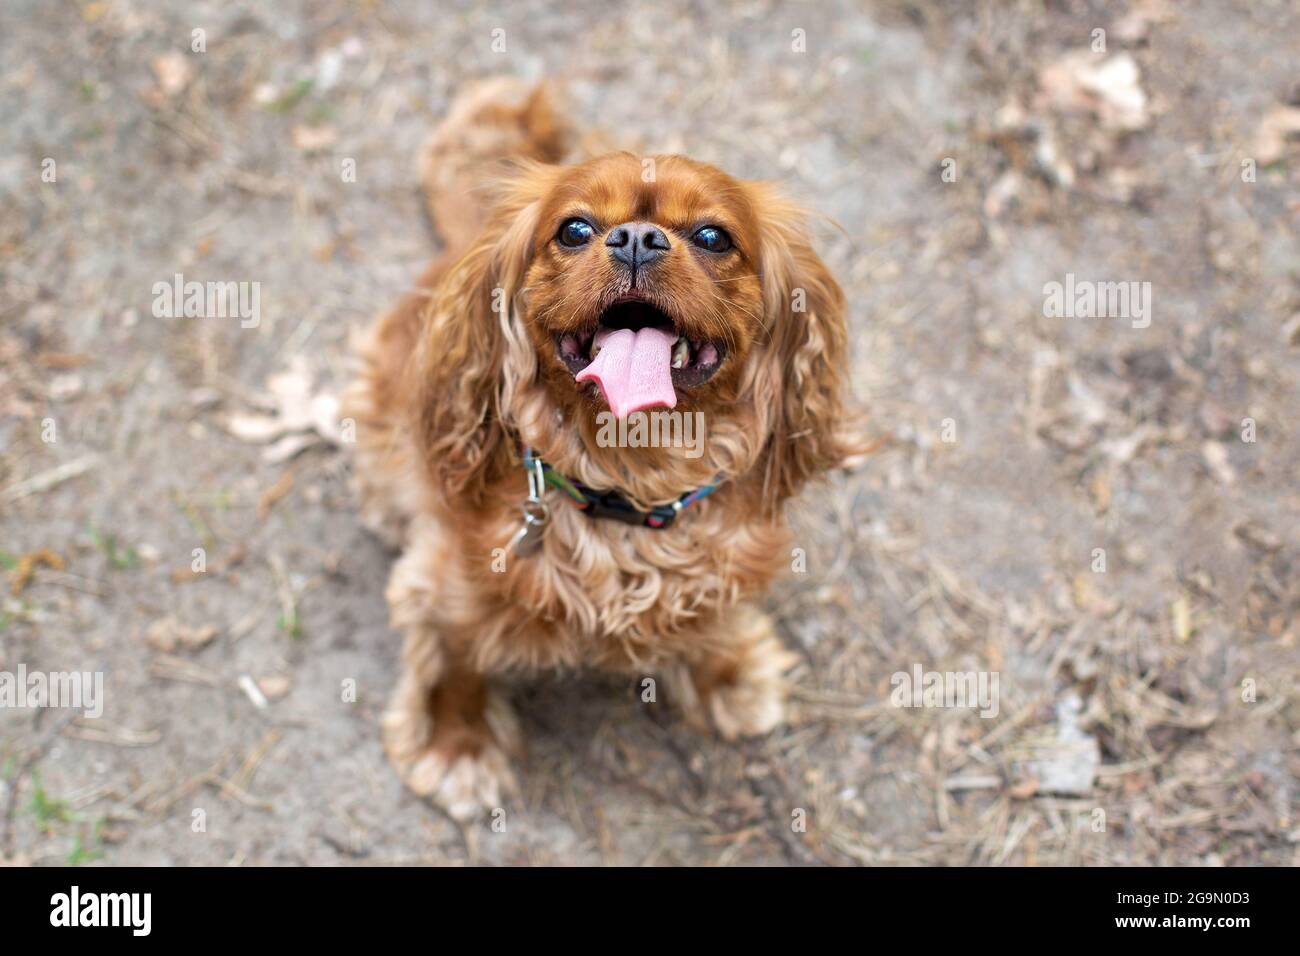 Happy dog with tongue out, cavalier spaniel on a walk Stock Photo